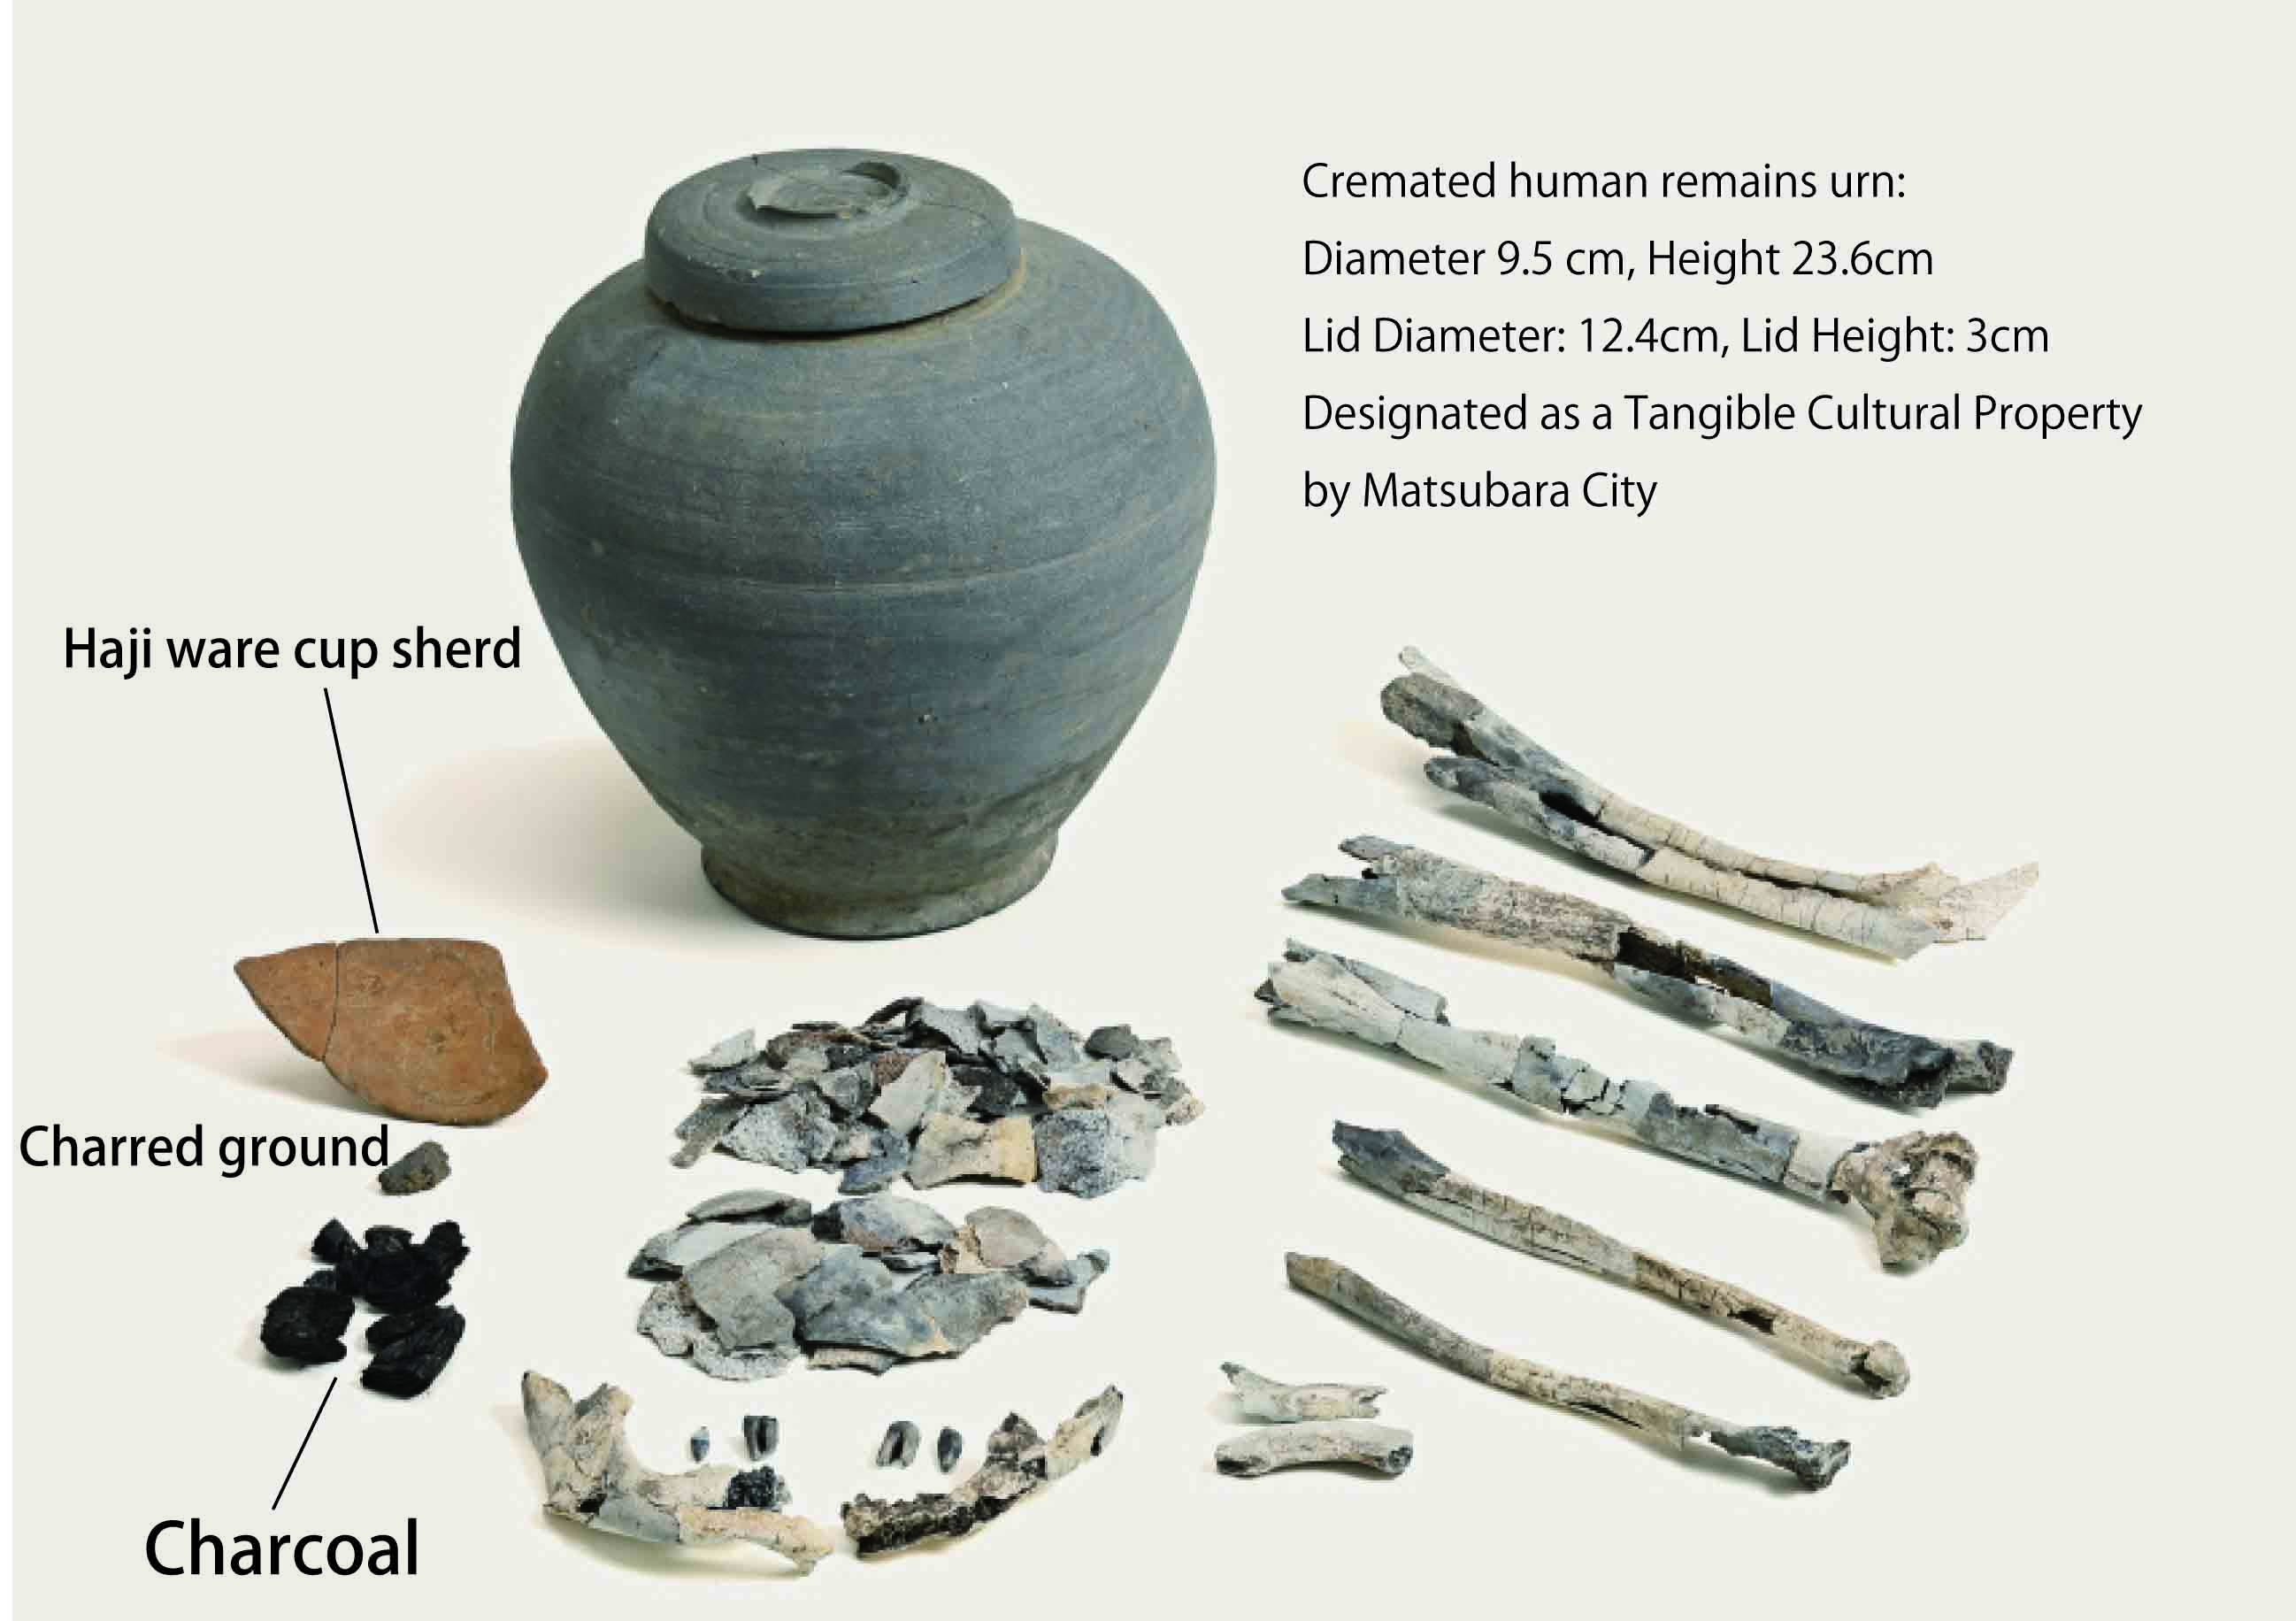 Objects found within the cremation grave